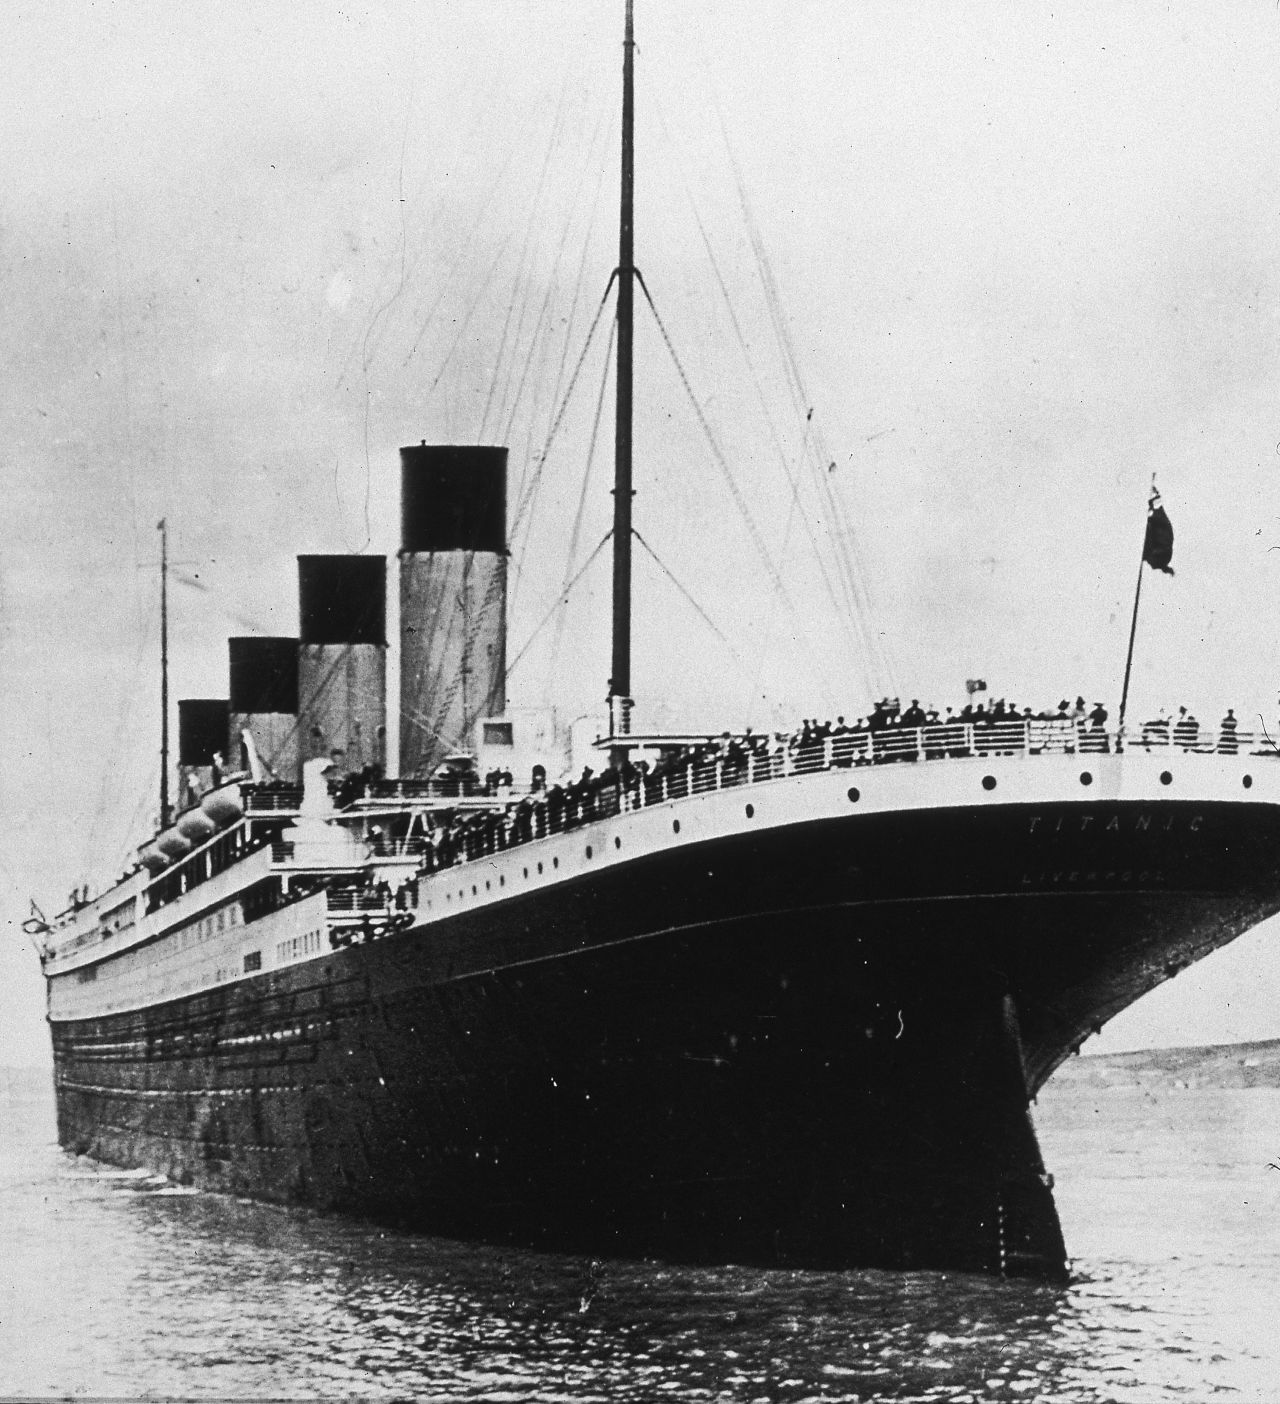 The Titanic starts off on her first and last voyage, leaving Queenstown, now Cobh, Ireland, on April 10, 1912.